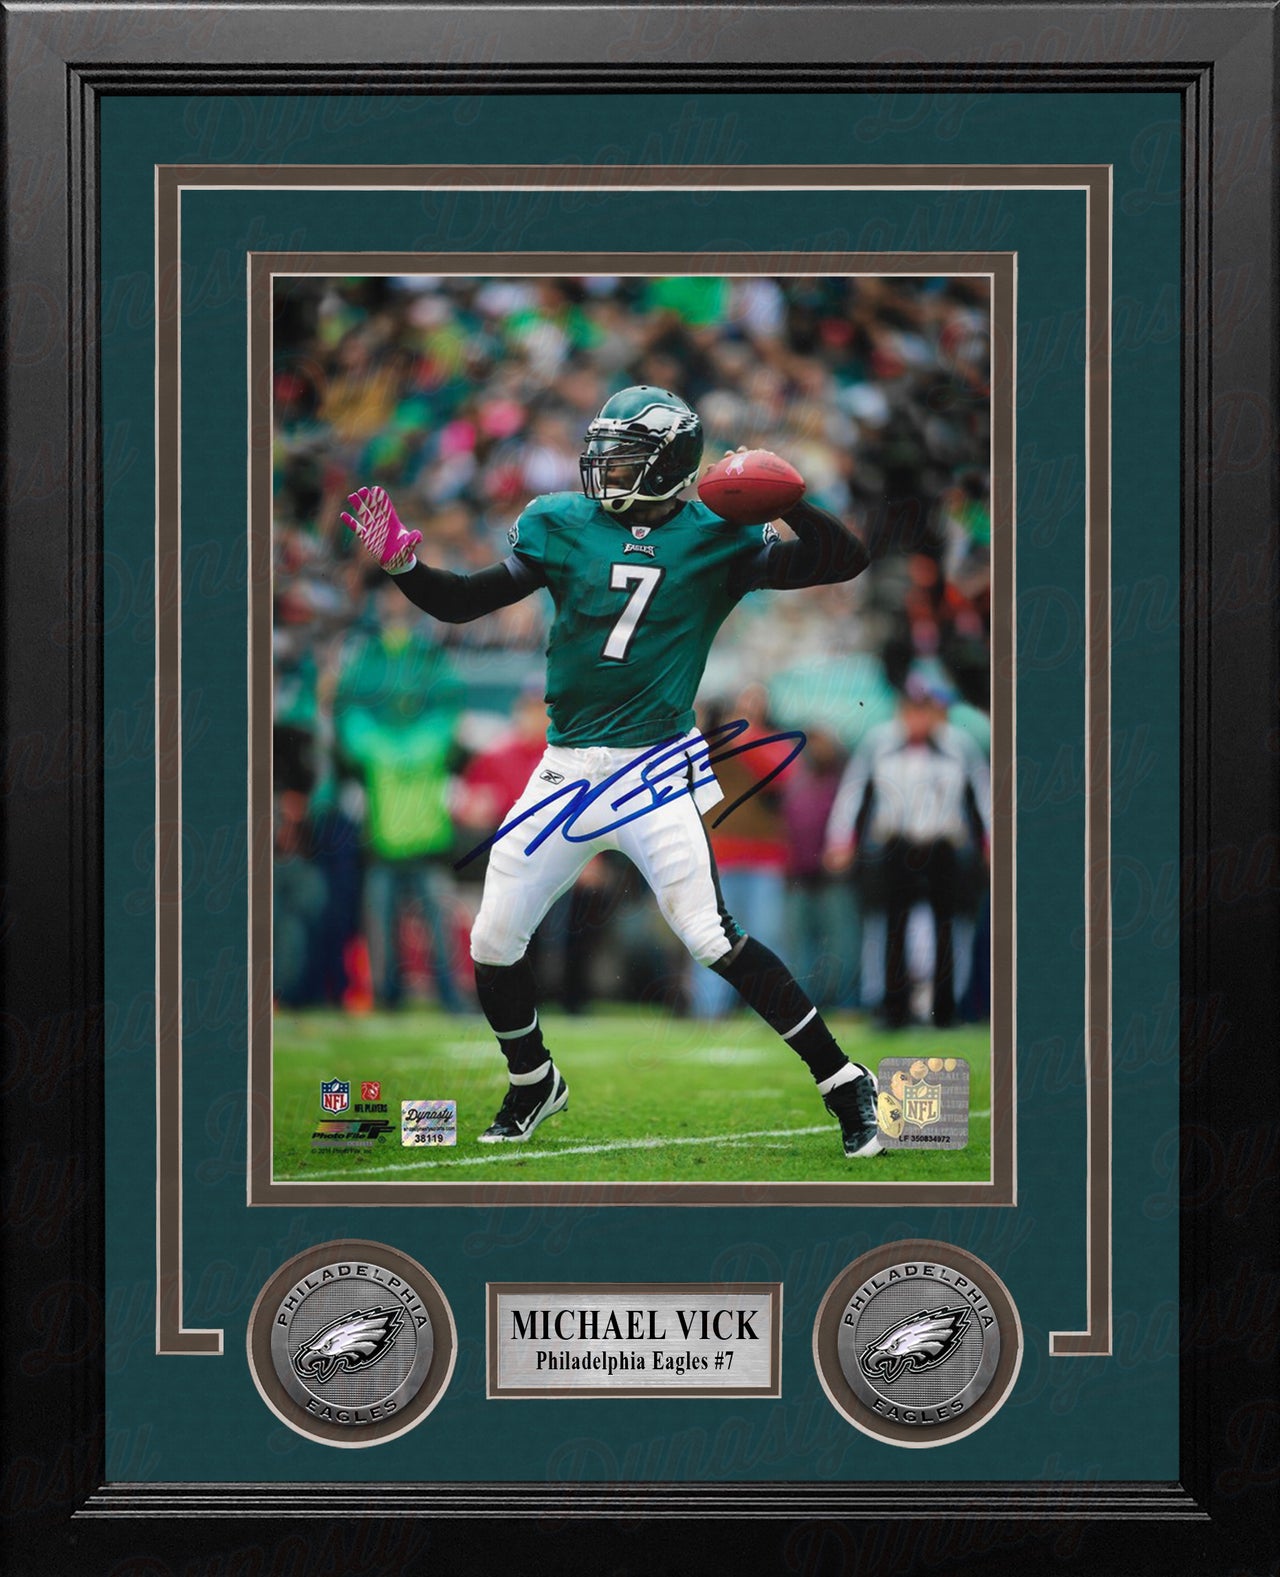 Michael Vick Throwing Action Philadelphia Eagles Autographed 8" x 10" Framed Football Photo